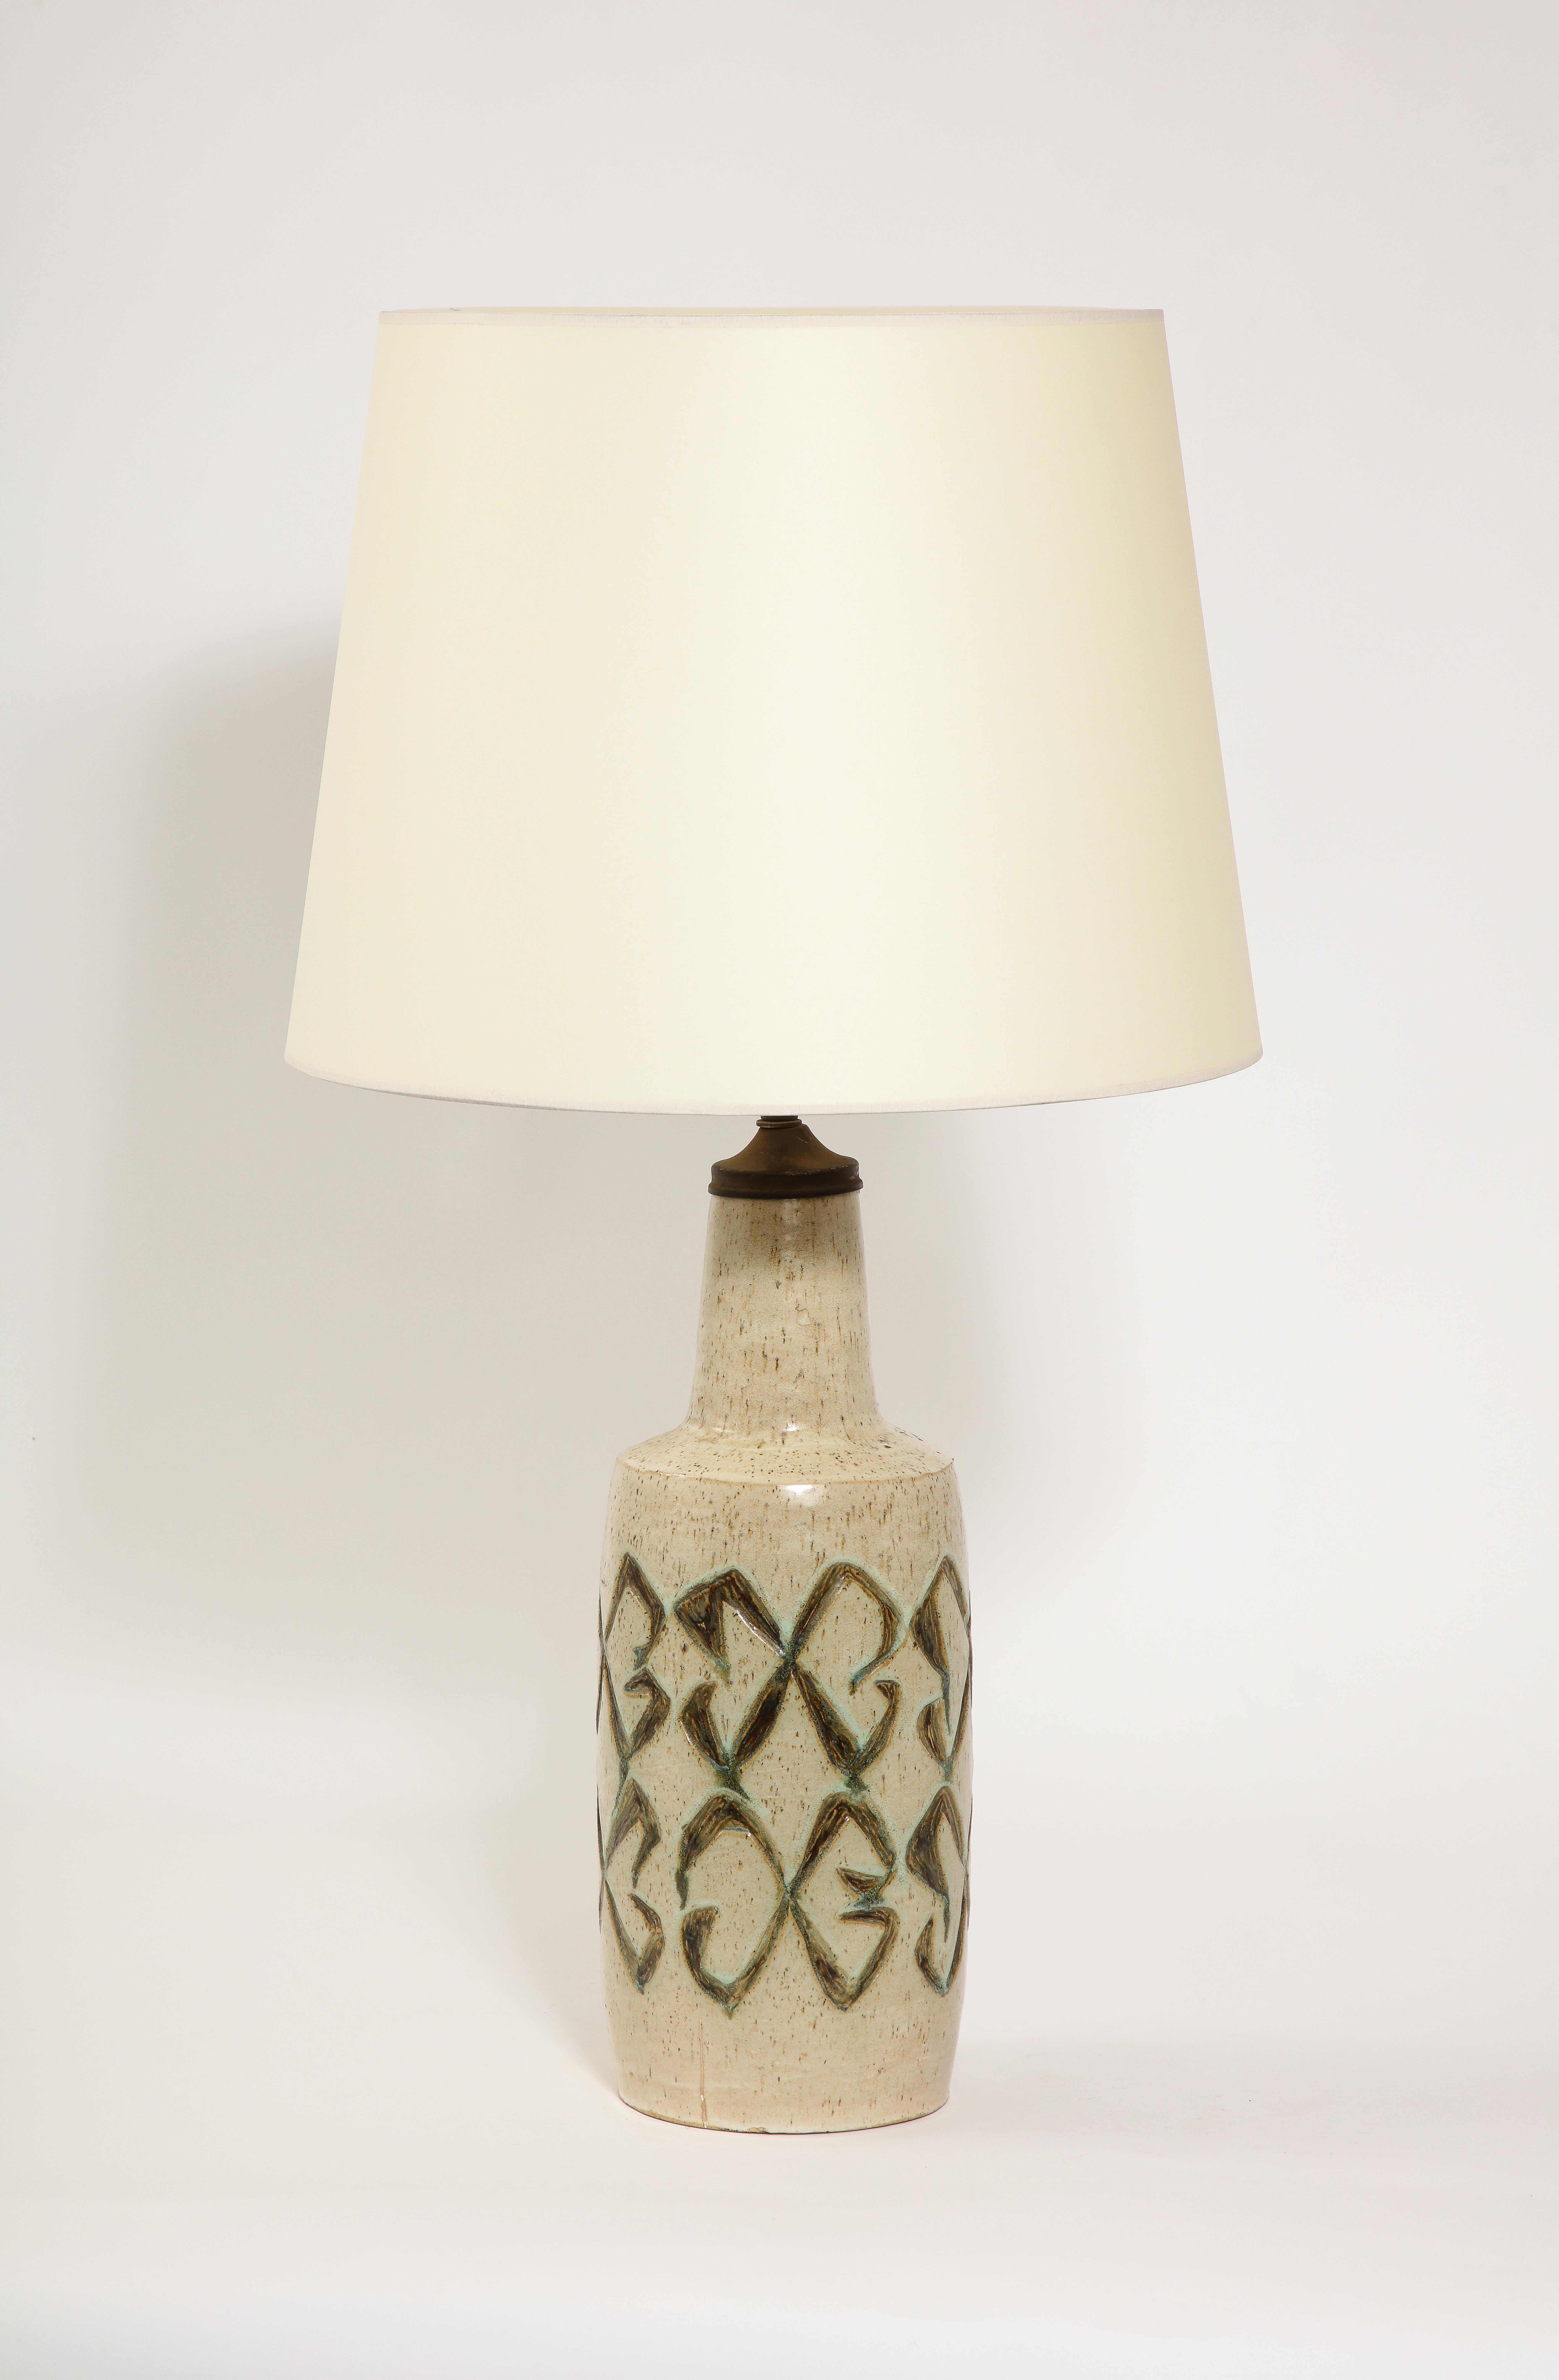 Green & Tan Abstract Pattern Ceramic Lamp, USA 1960's For Sale 4